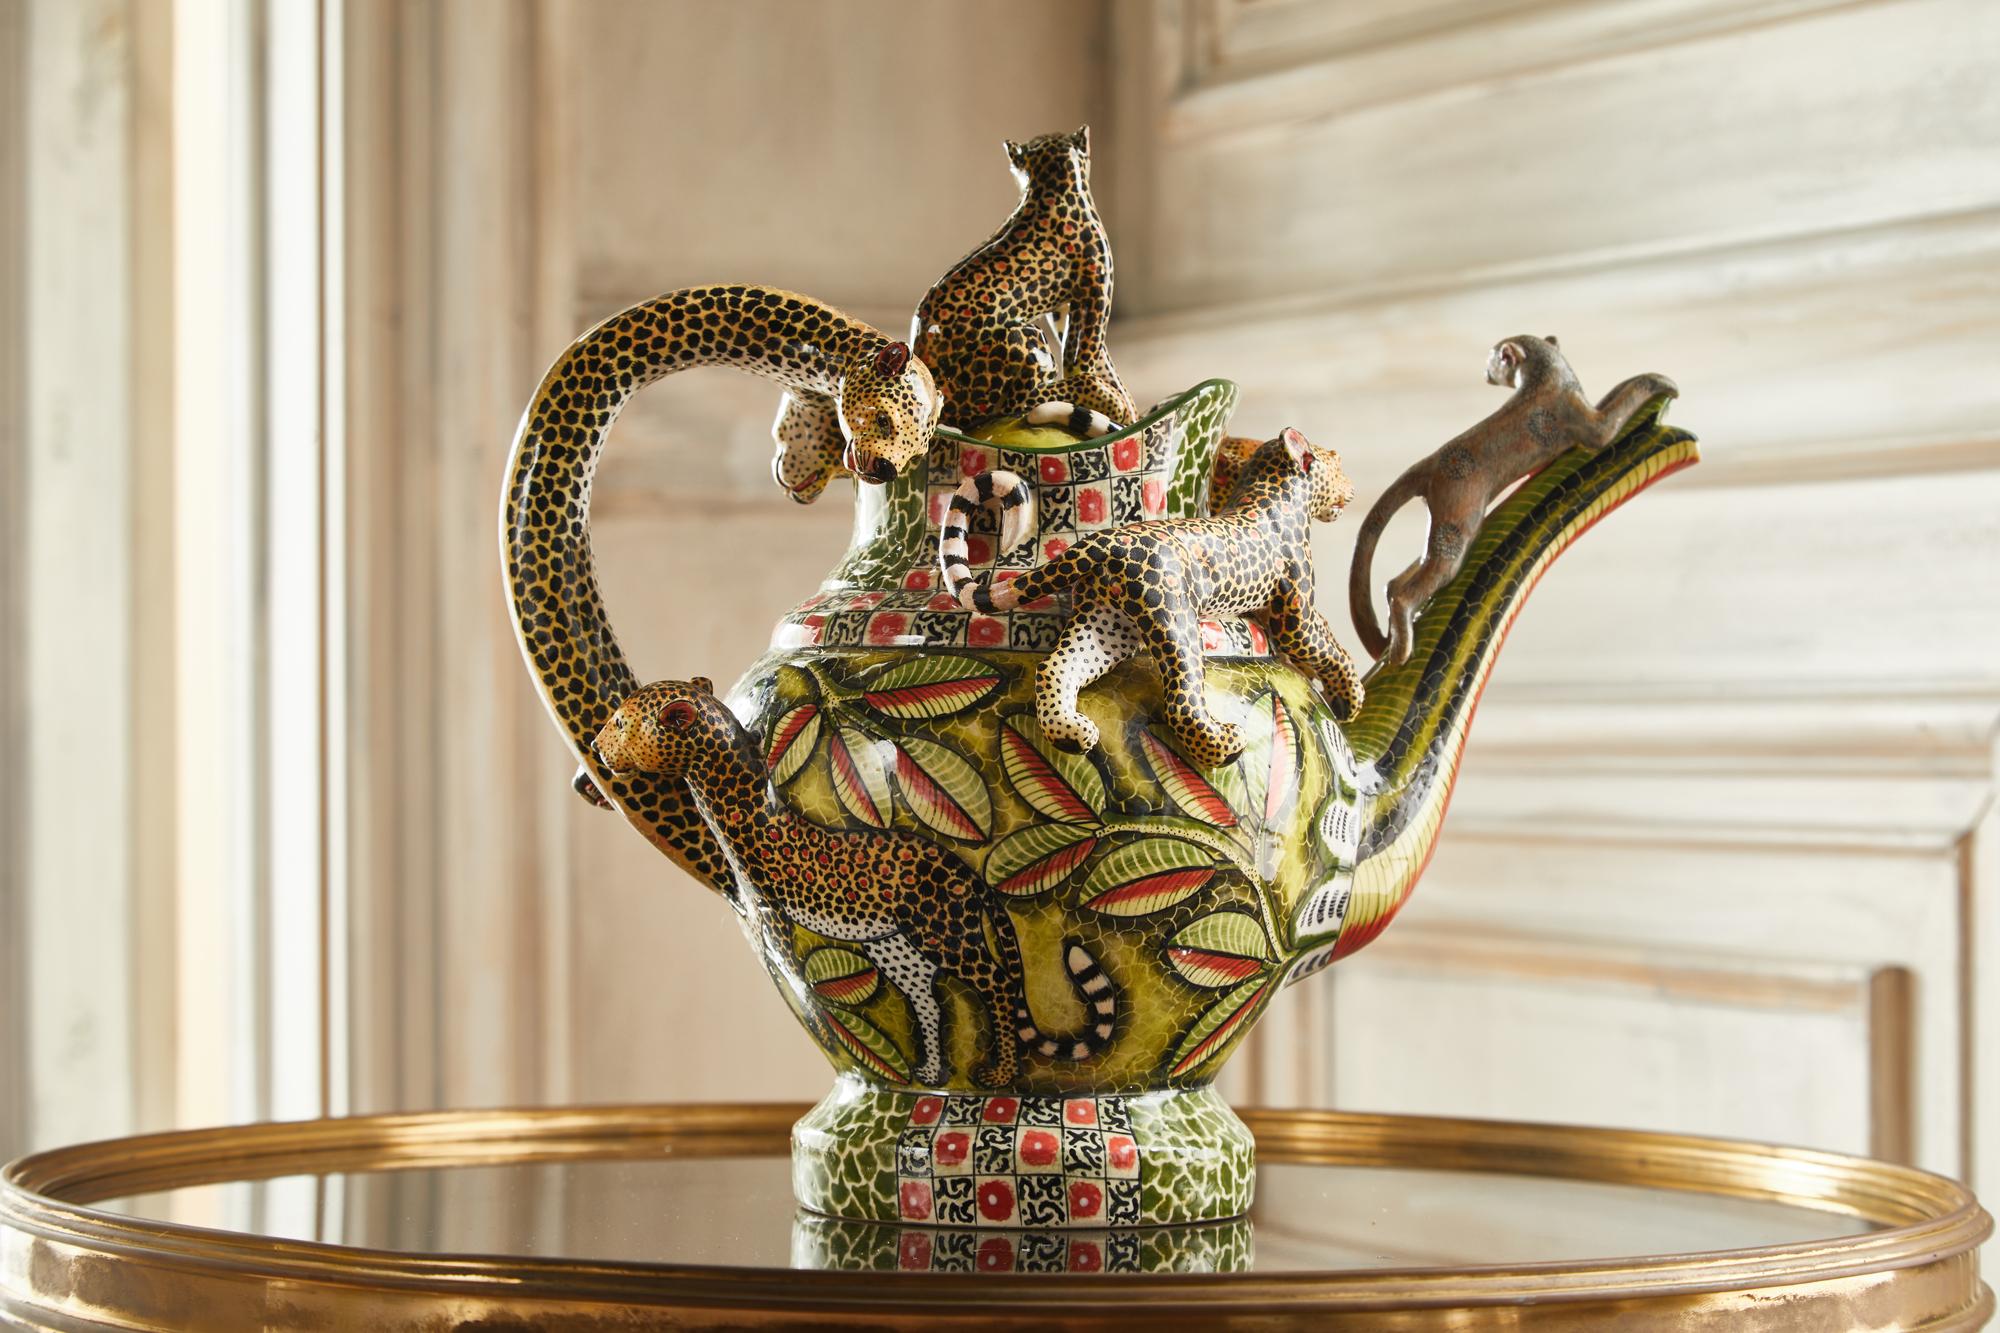 This teapot inspires us of the fantasy world of Ardmore, where leopards are in perfect harmony with nature. The lush foliage and exuberant patterns showcase Ardmore's extravagant yet peaceful wilderness.

These masterpieces are individually made